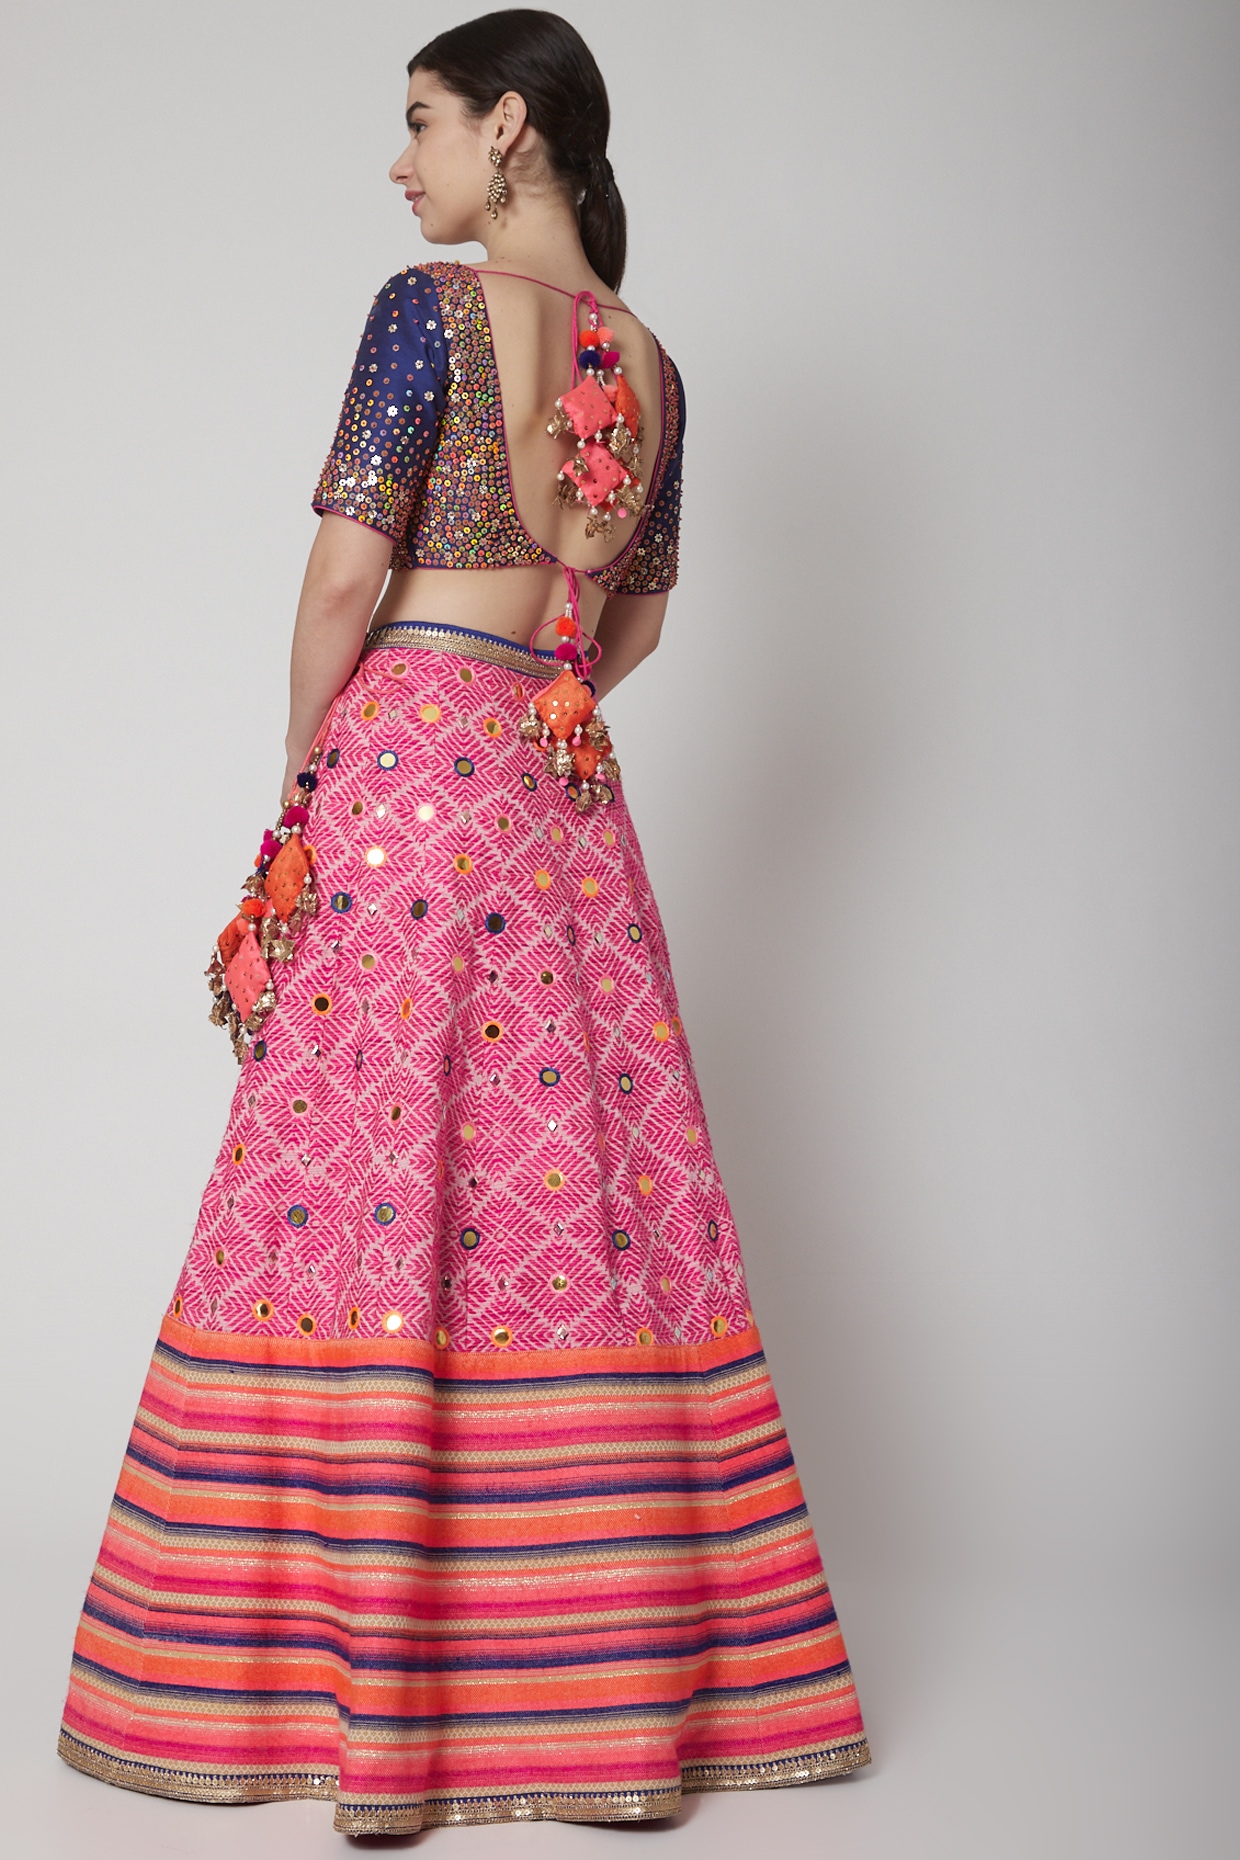 Photo of Red and White Bridal Lehenga with Blue Blouse